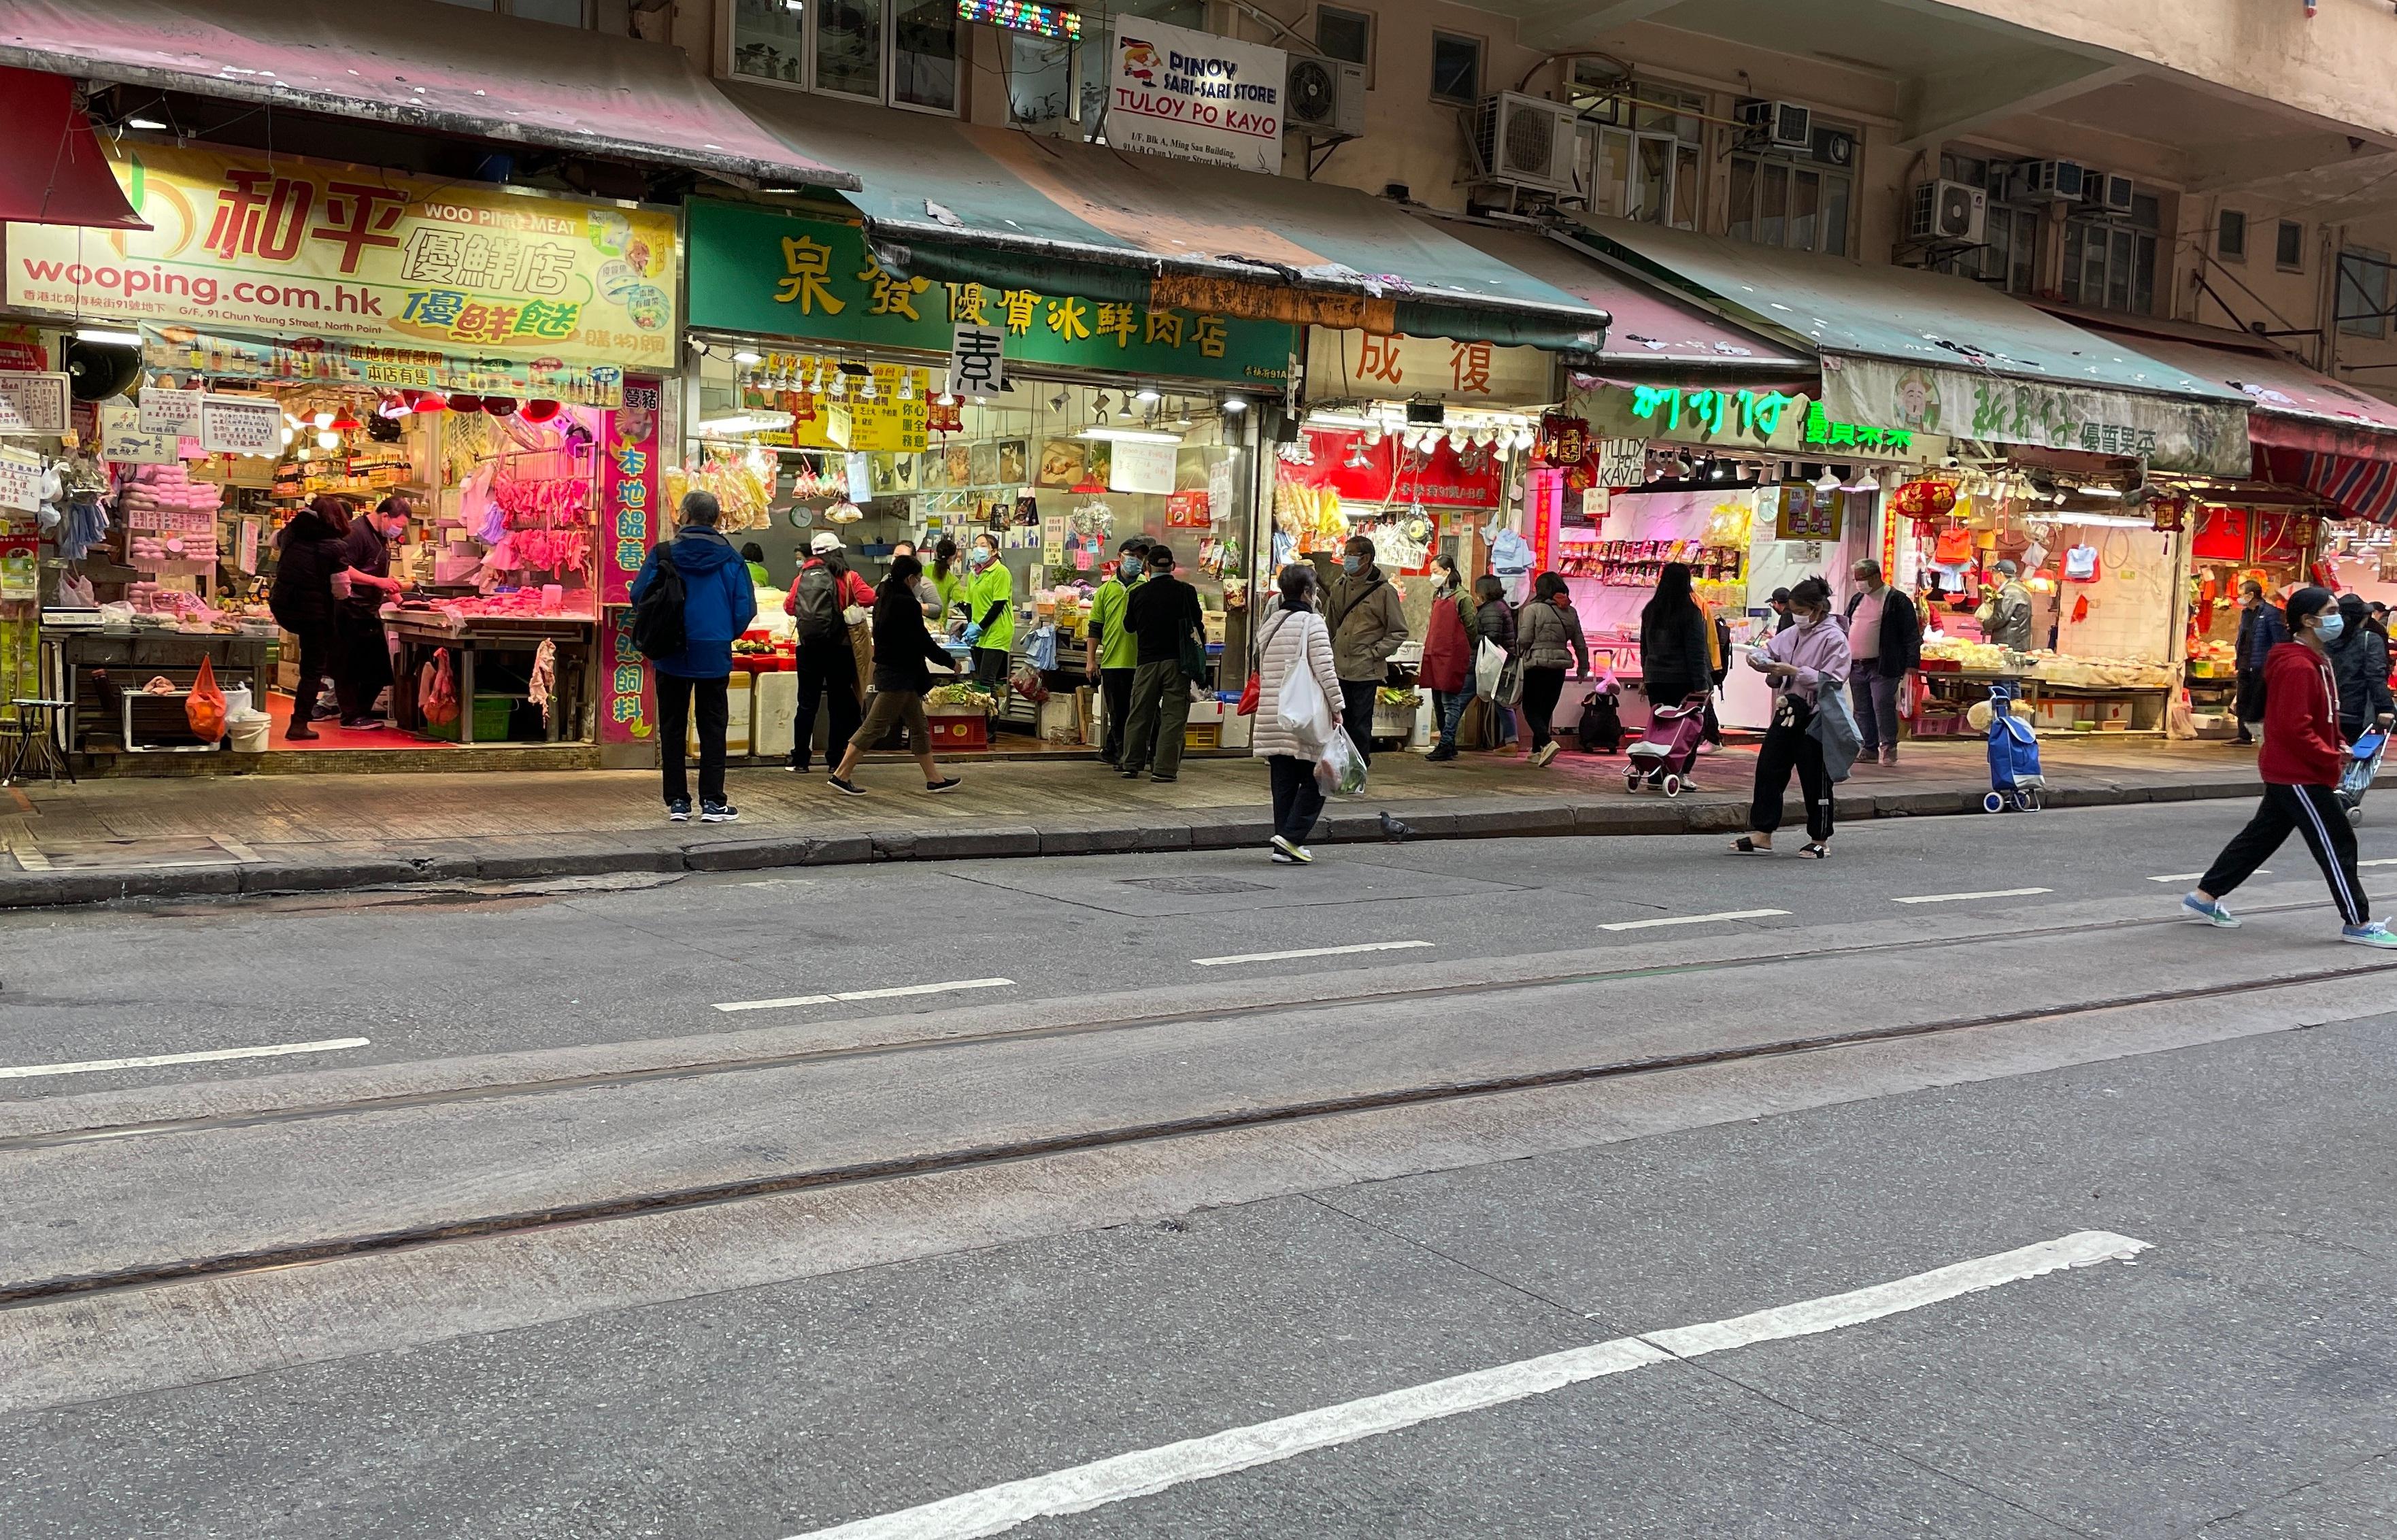 A spokesman of the Food and Environmental Hygiene Department (FEHD) said today (February 16) that the FEHD and the Police have taken over 500 joint enforcement actions in all districts since October last year and achieved satisfactory results. Photo shows the situation on Chun Yeung Street in North Point.